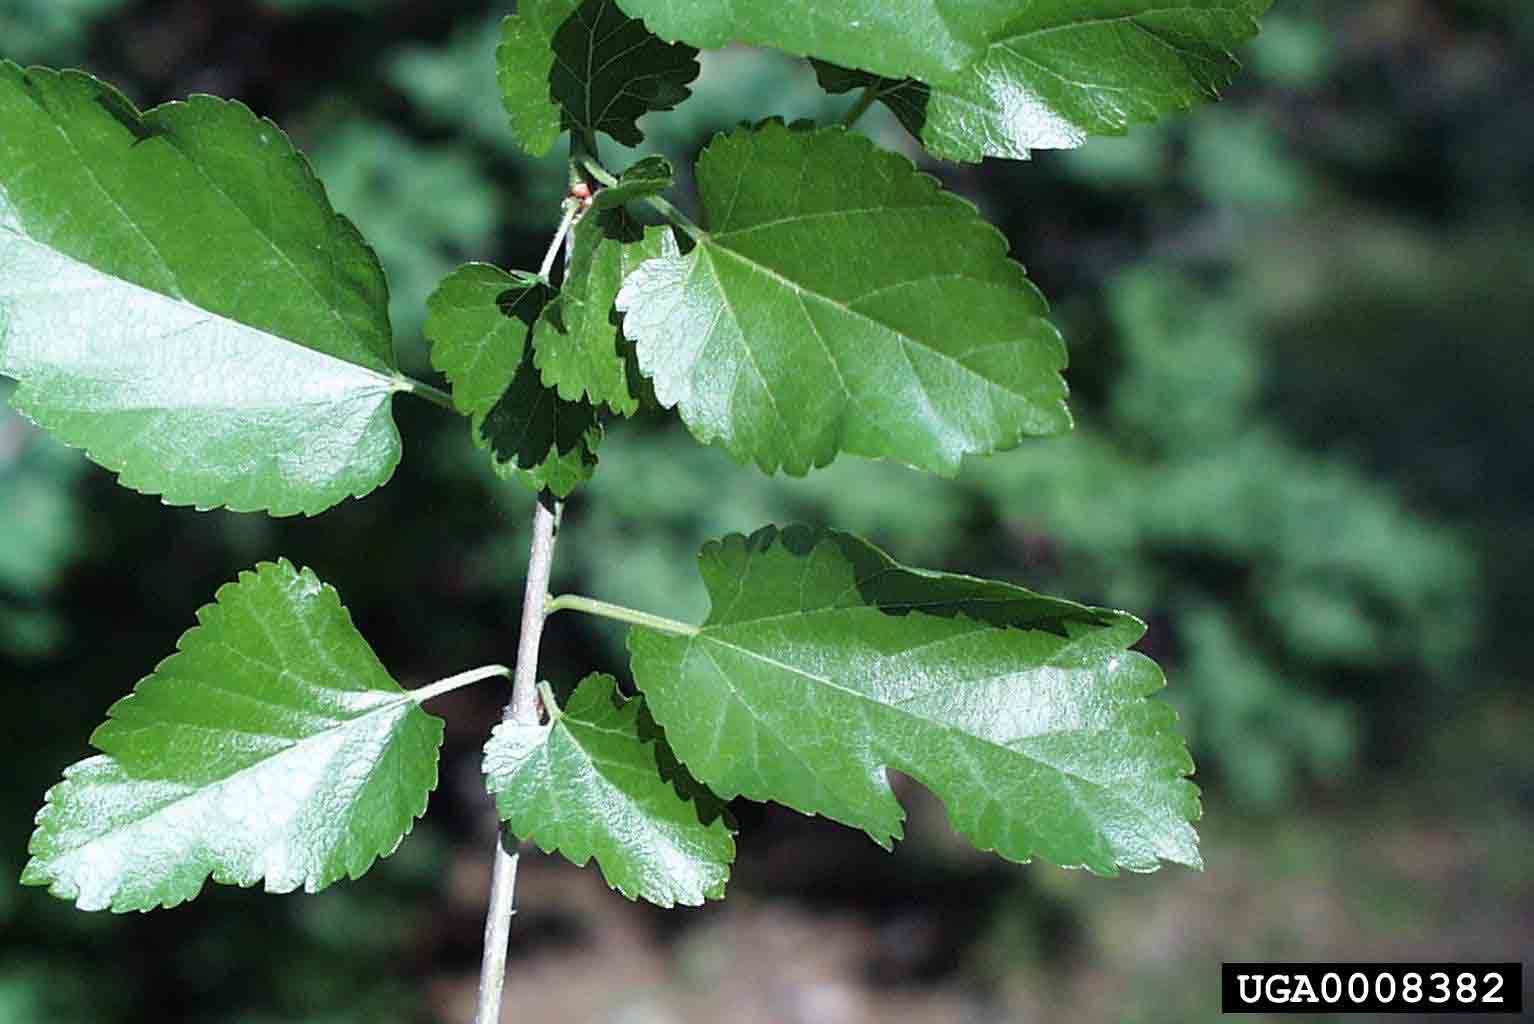 White mulberry leaves, unlobed and lobed, with smooth upper surfaces